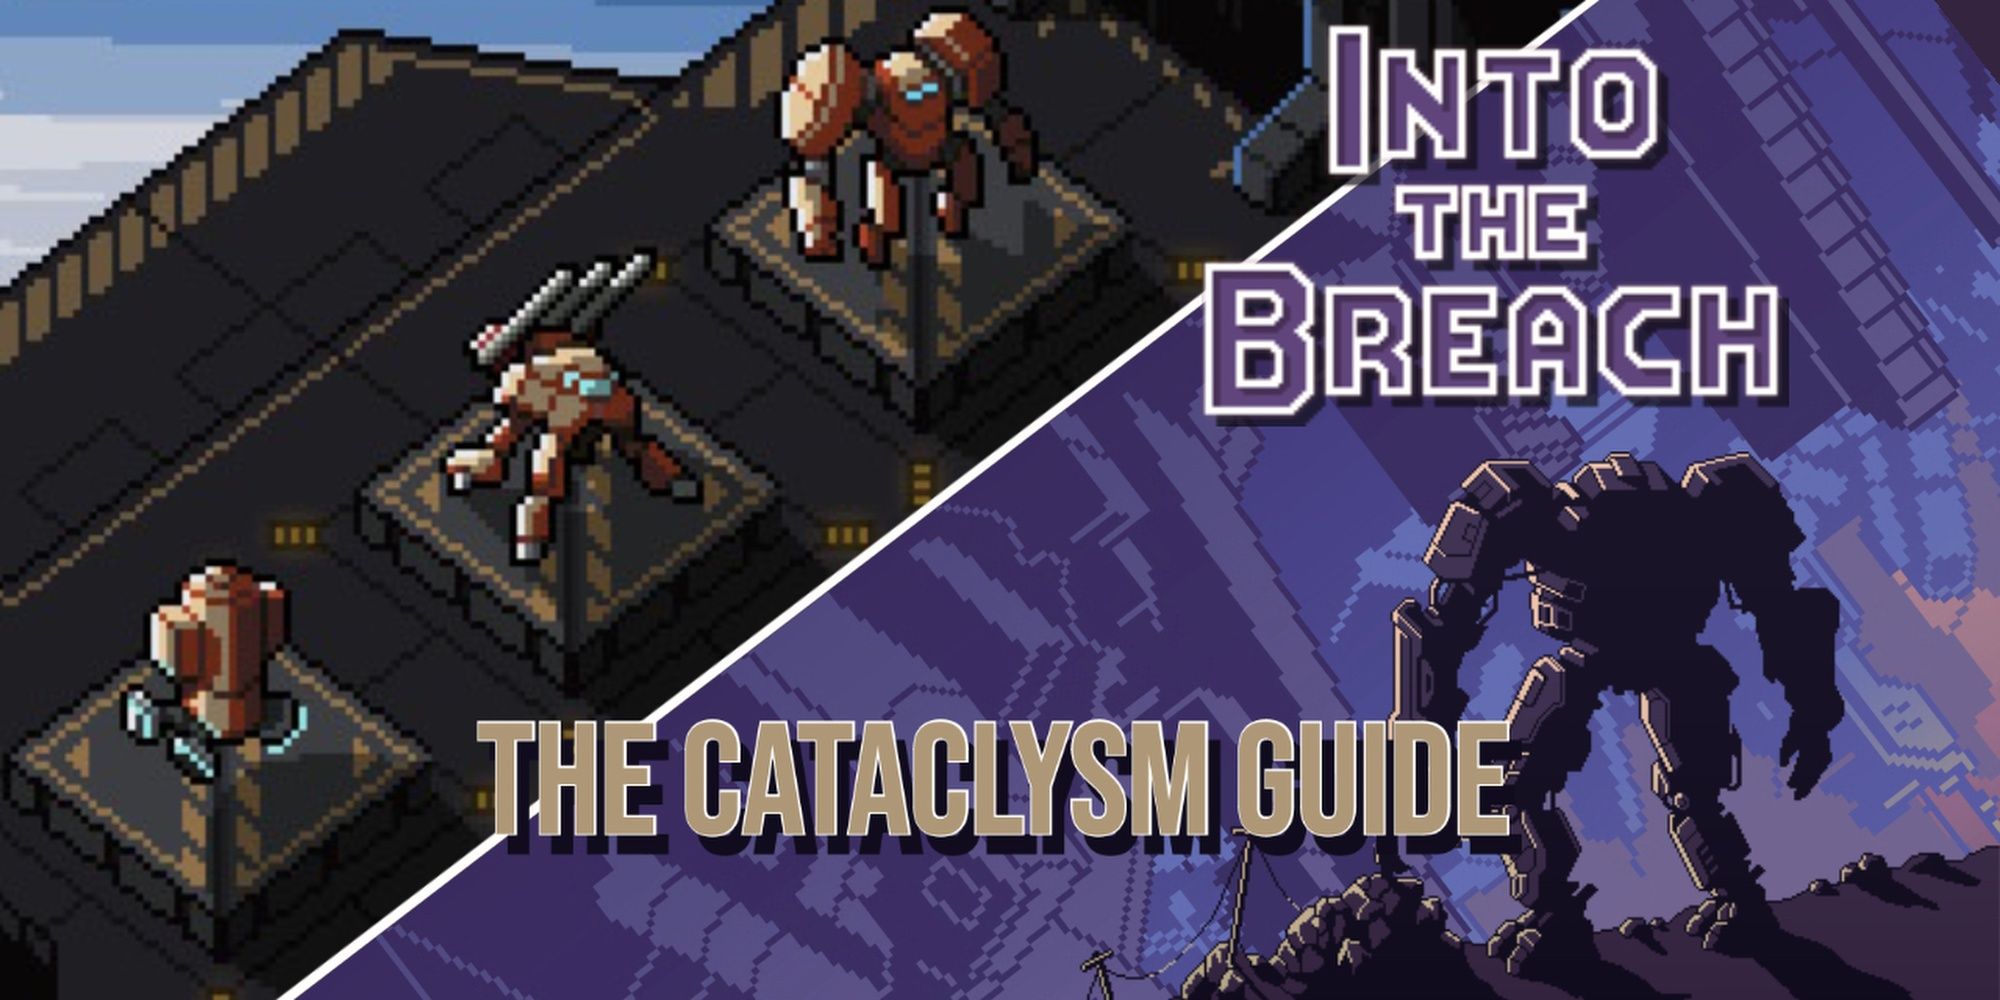 Collage of Cataclysm Squad and Into the Breach title screen